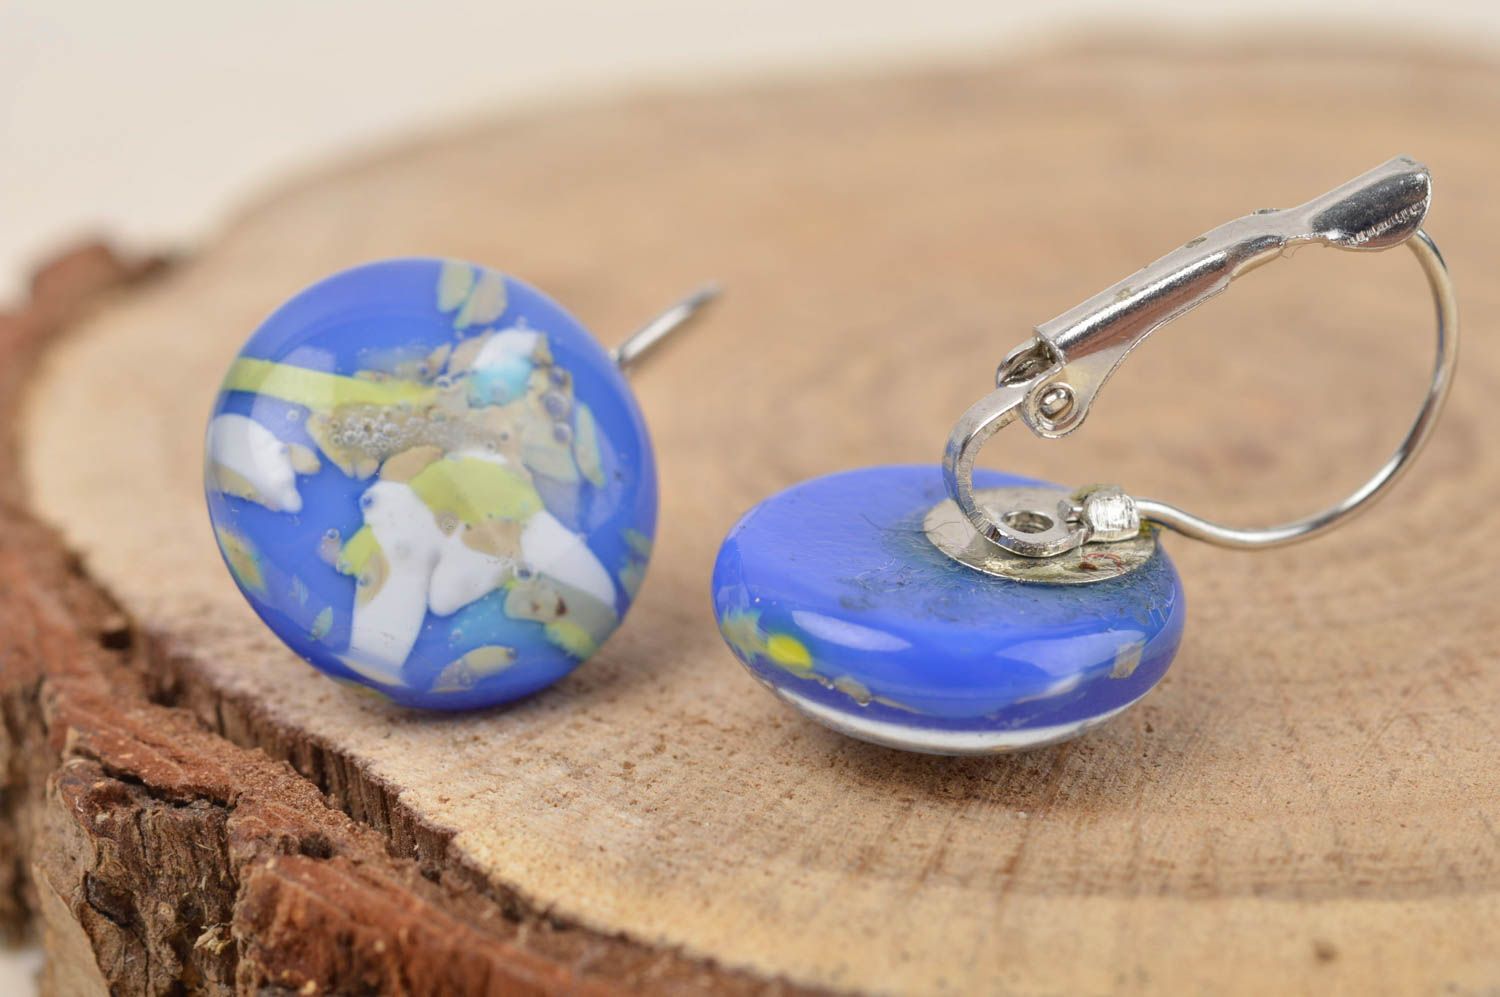 Unusual handmade glass earrings cool jewelry designs glass art gifts for her photo 1